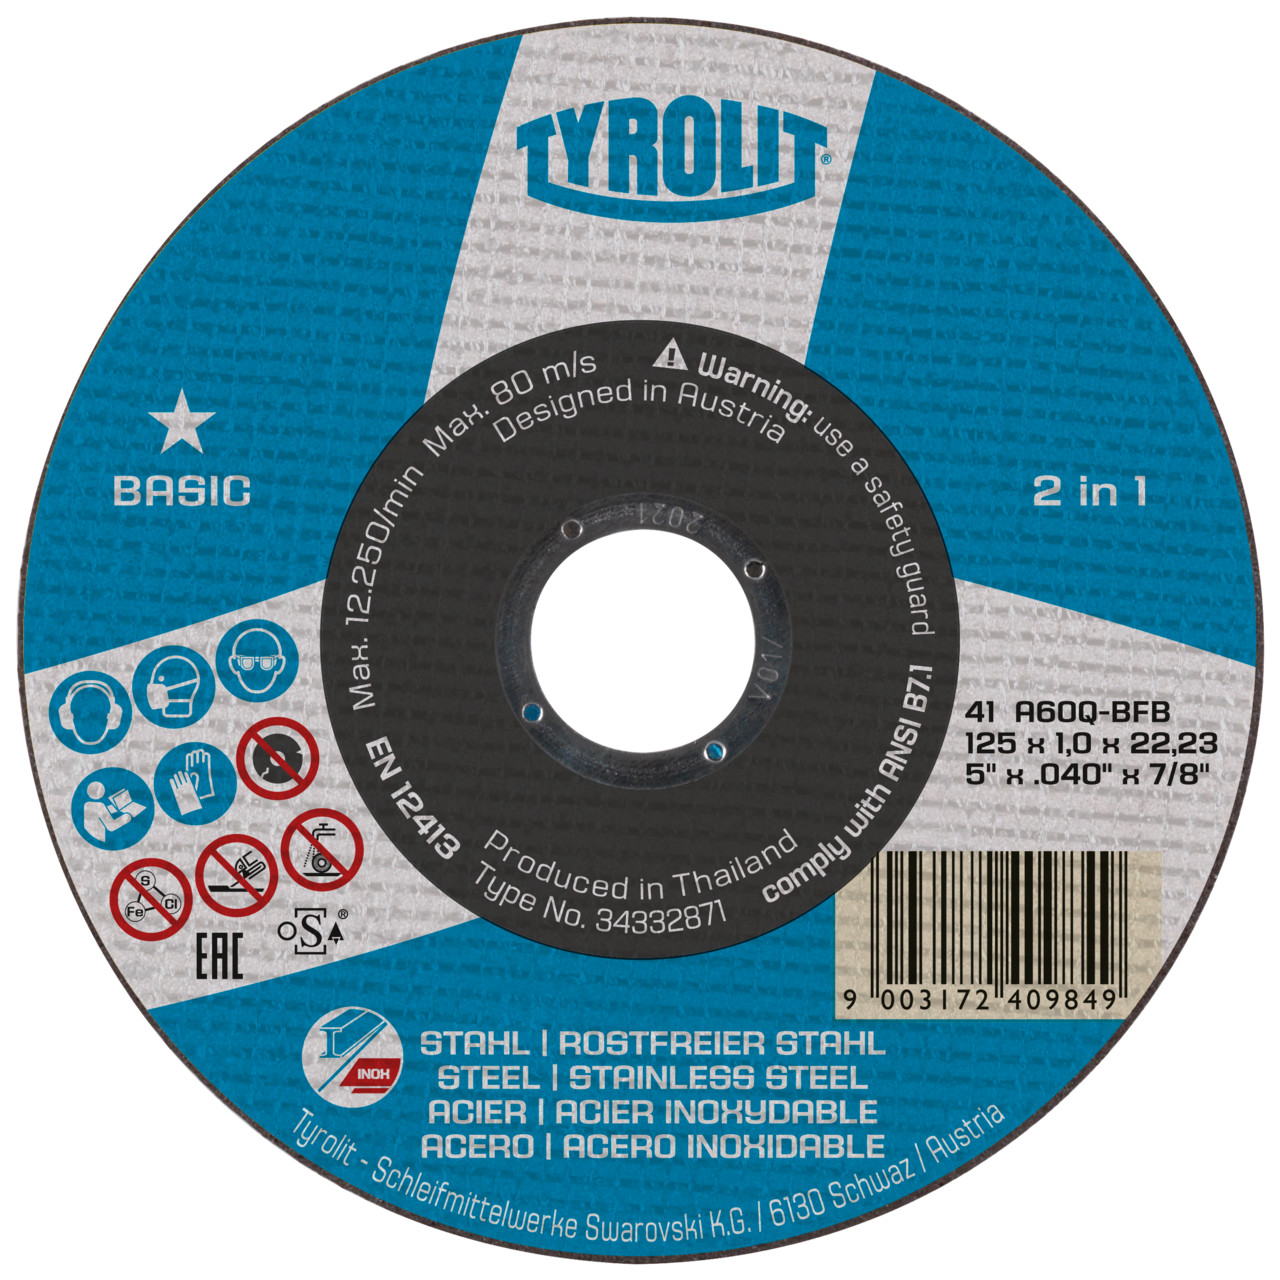 Tyrolit Cutting discs DxDxH 178x1.6x22.23 2in1 for steel and stainless steel, shape: 41 - straight version, Art. 34332875